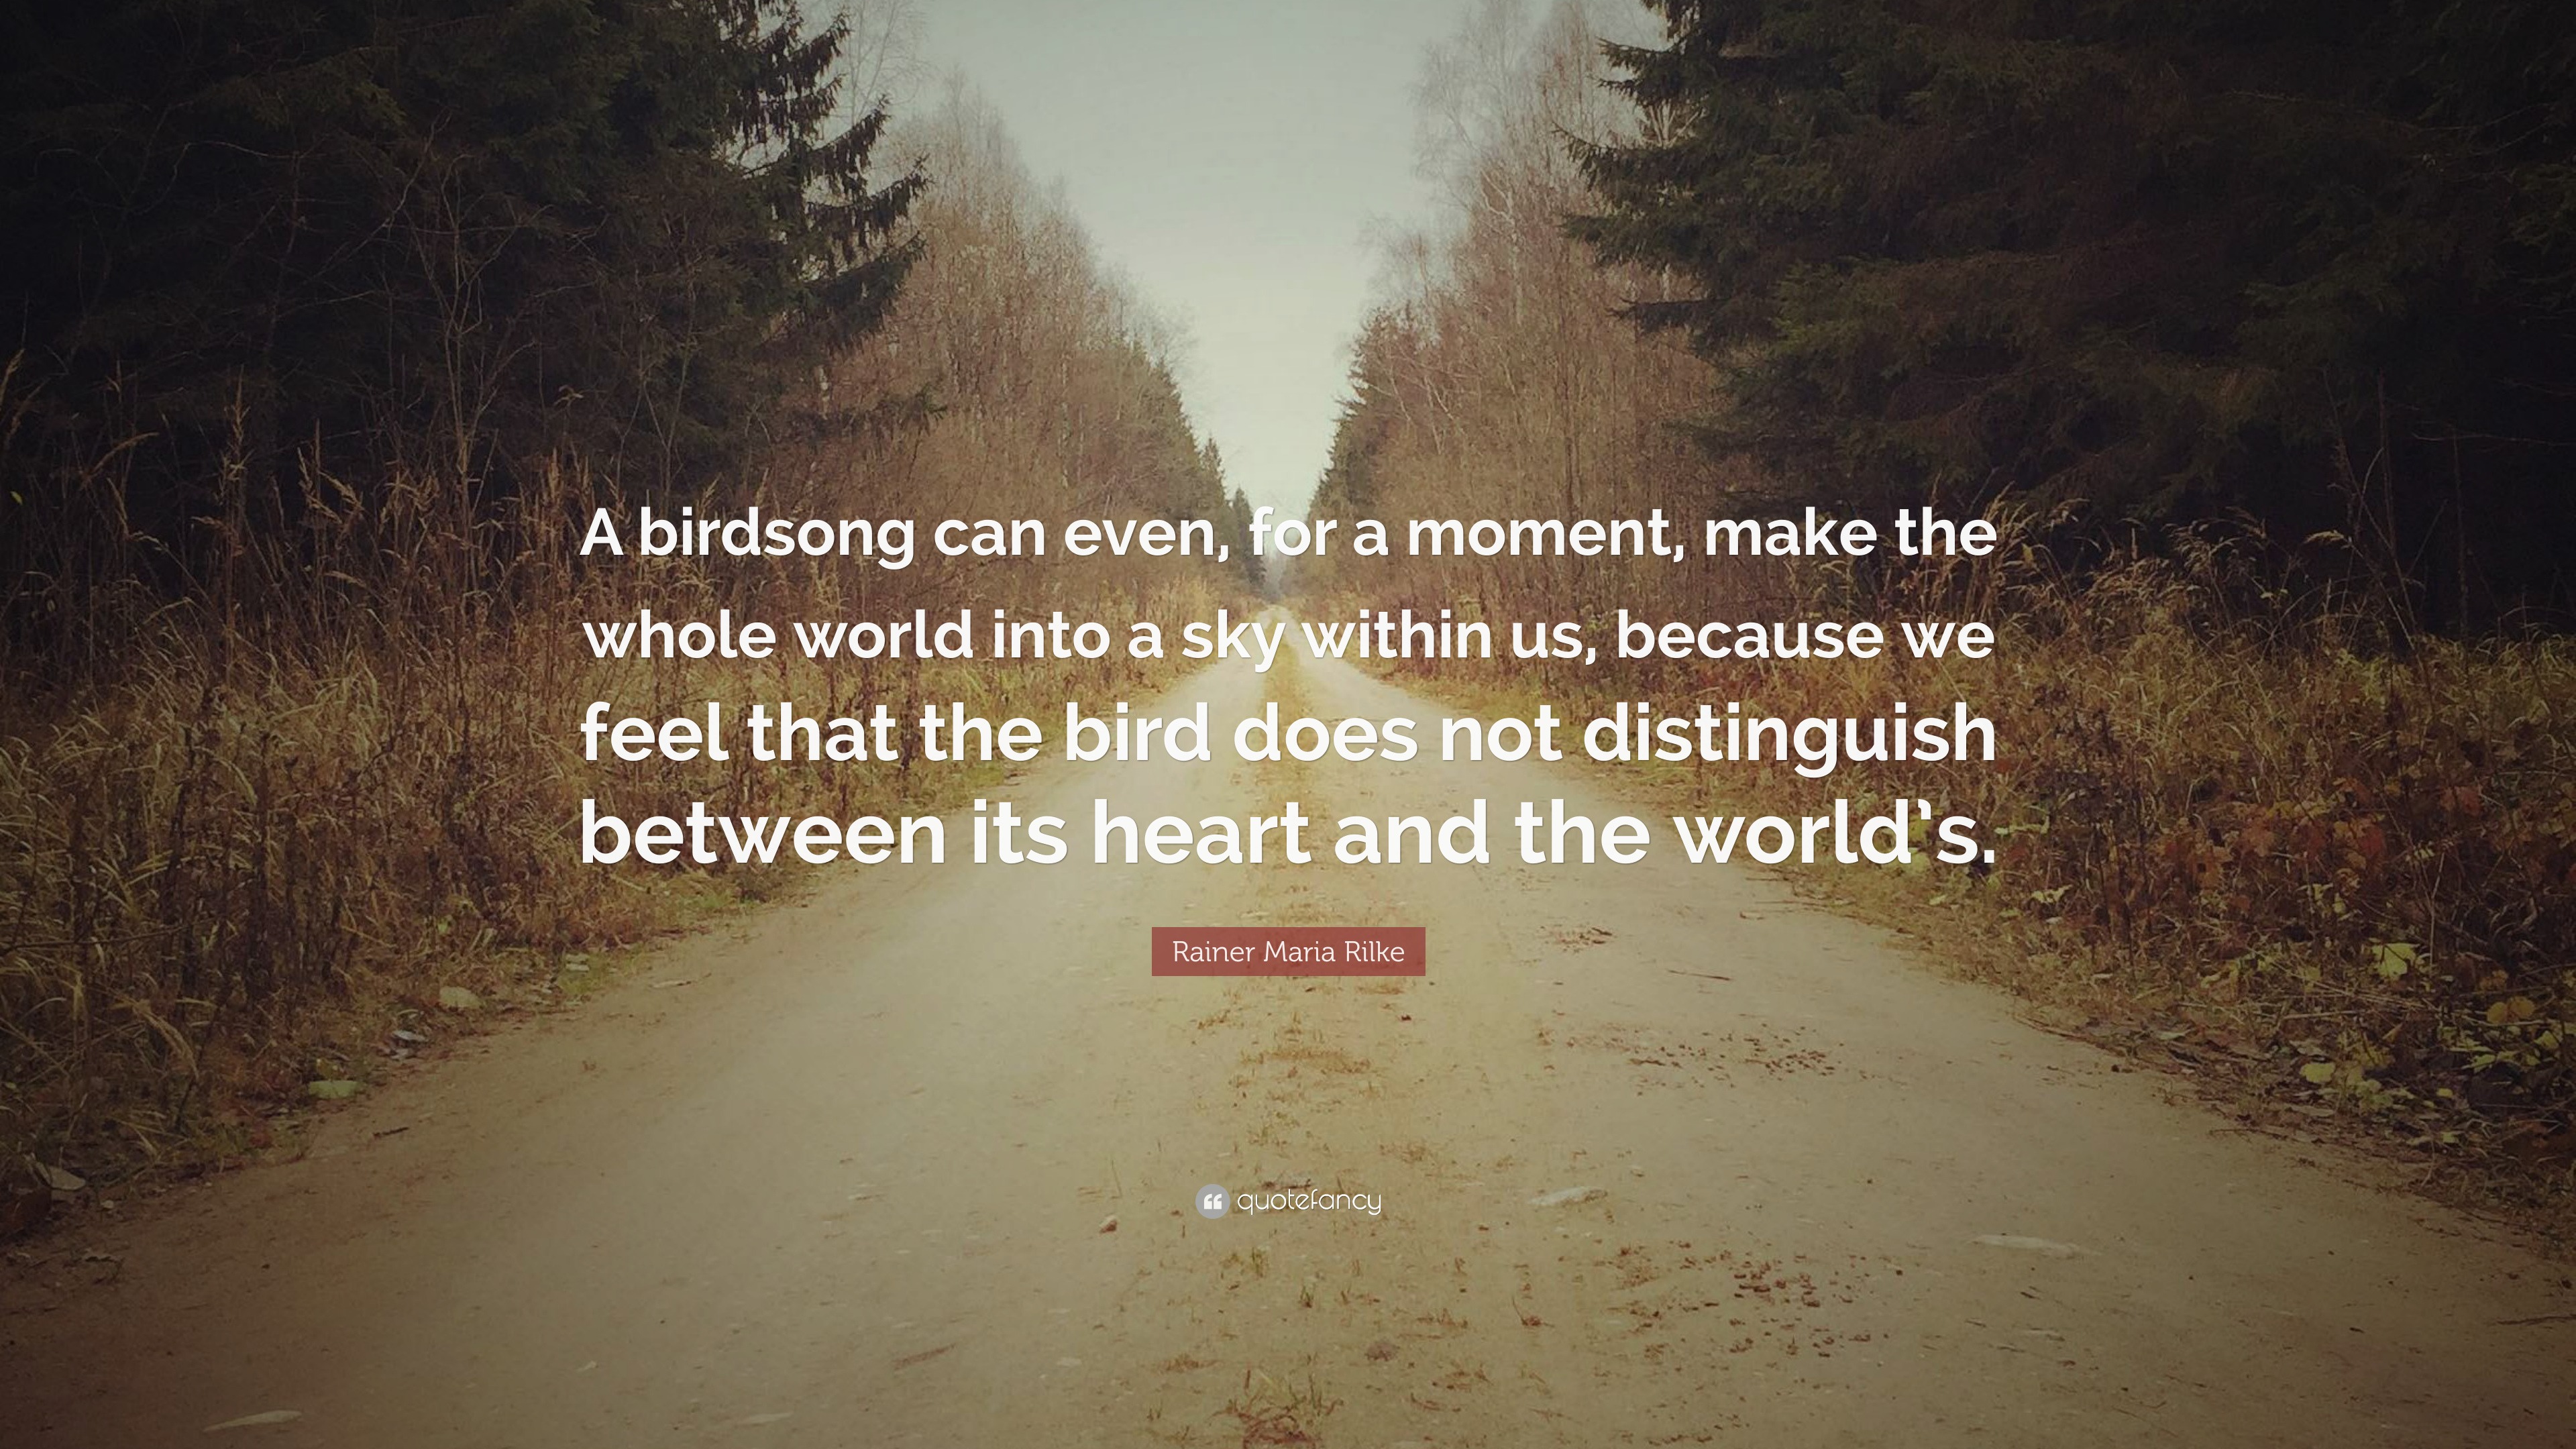 Rainer Maria Rilke Quote: “A birdsong can even, for a moment, make the  whole world into a sky within us, because we feel that the bird does not  dis...”